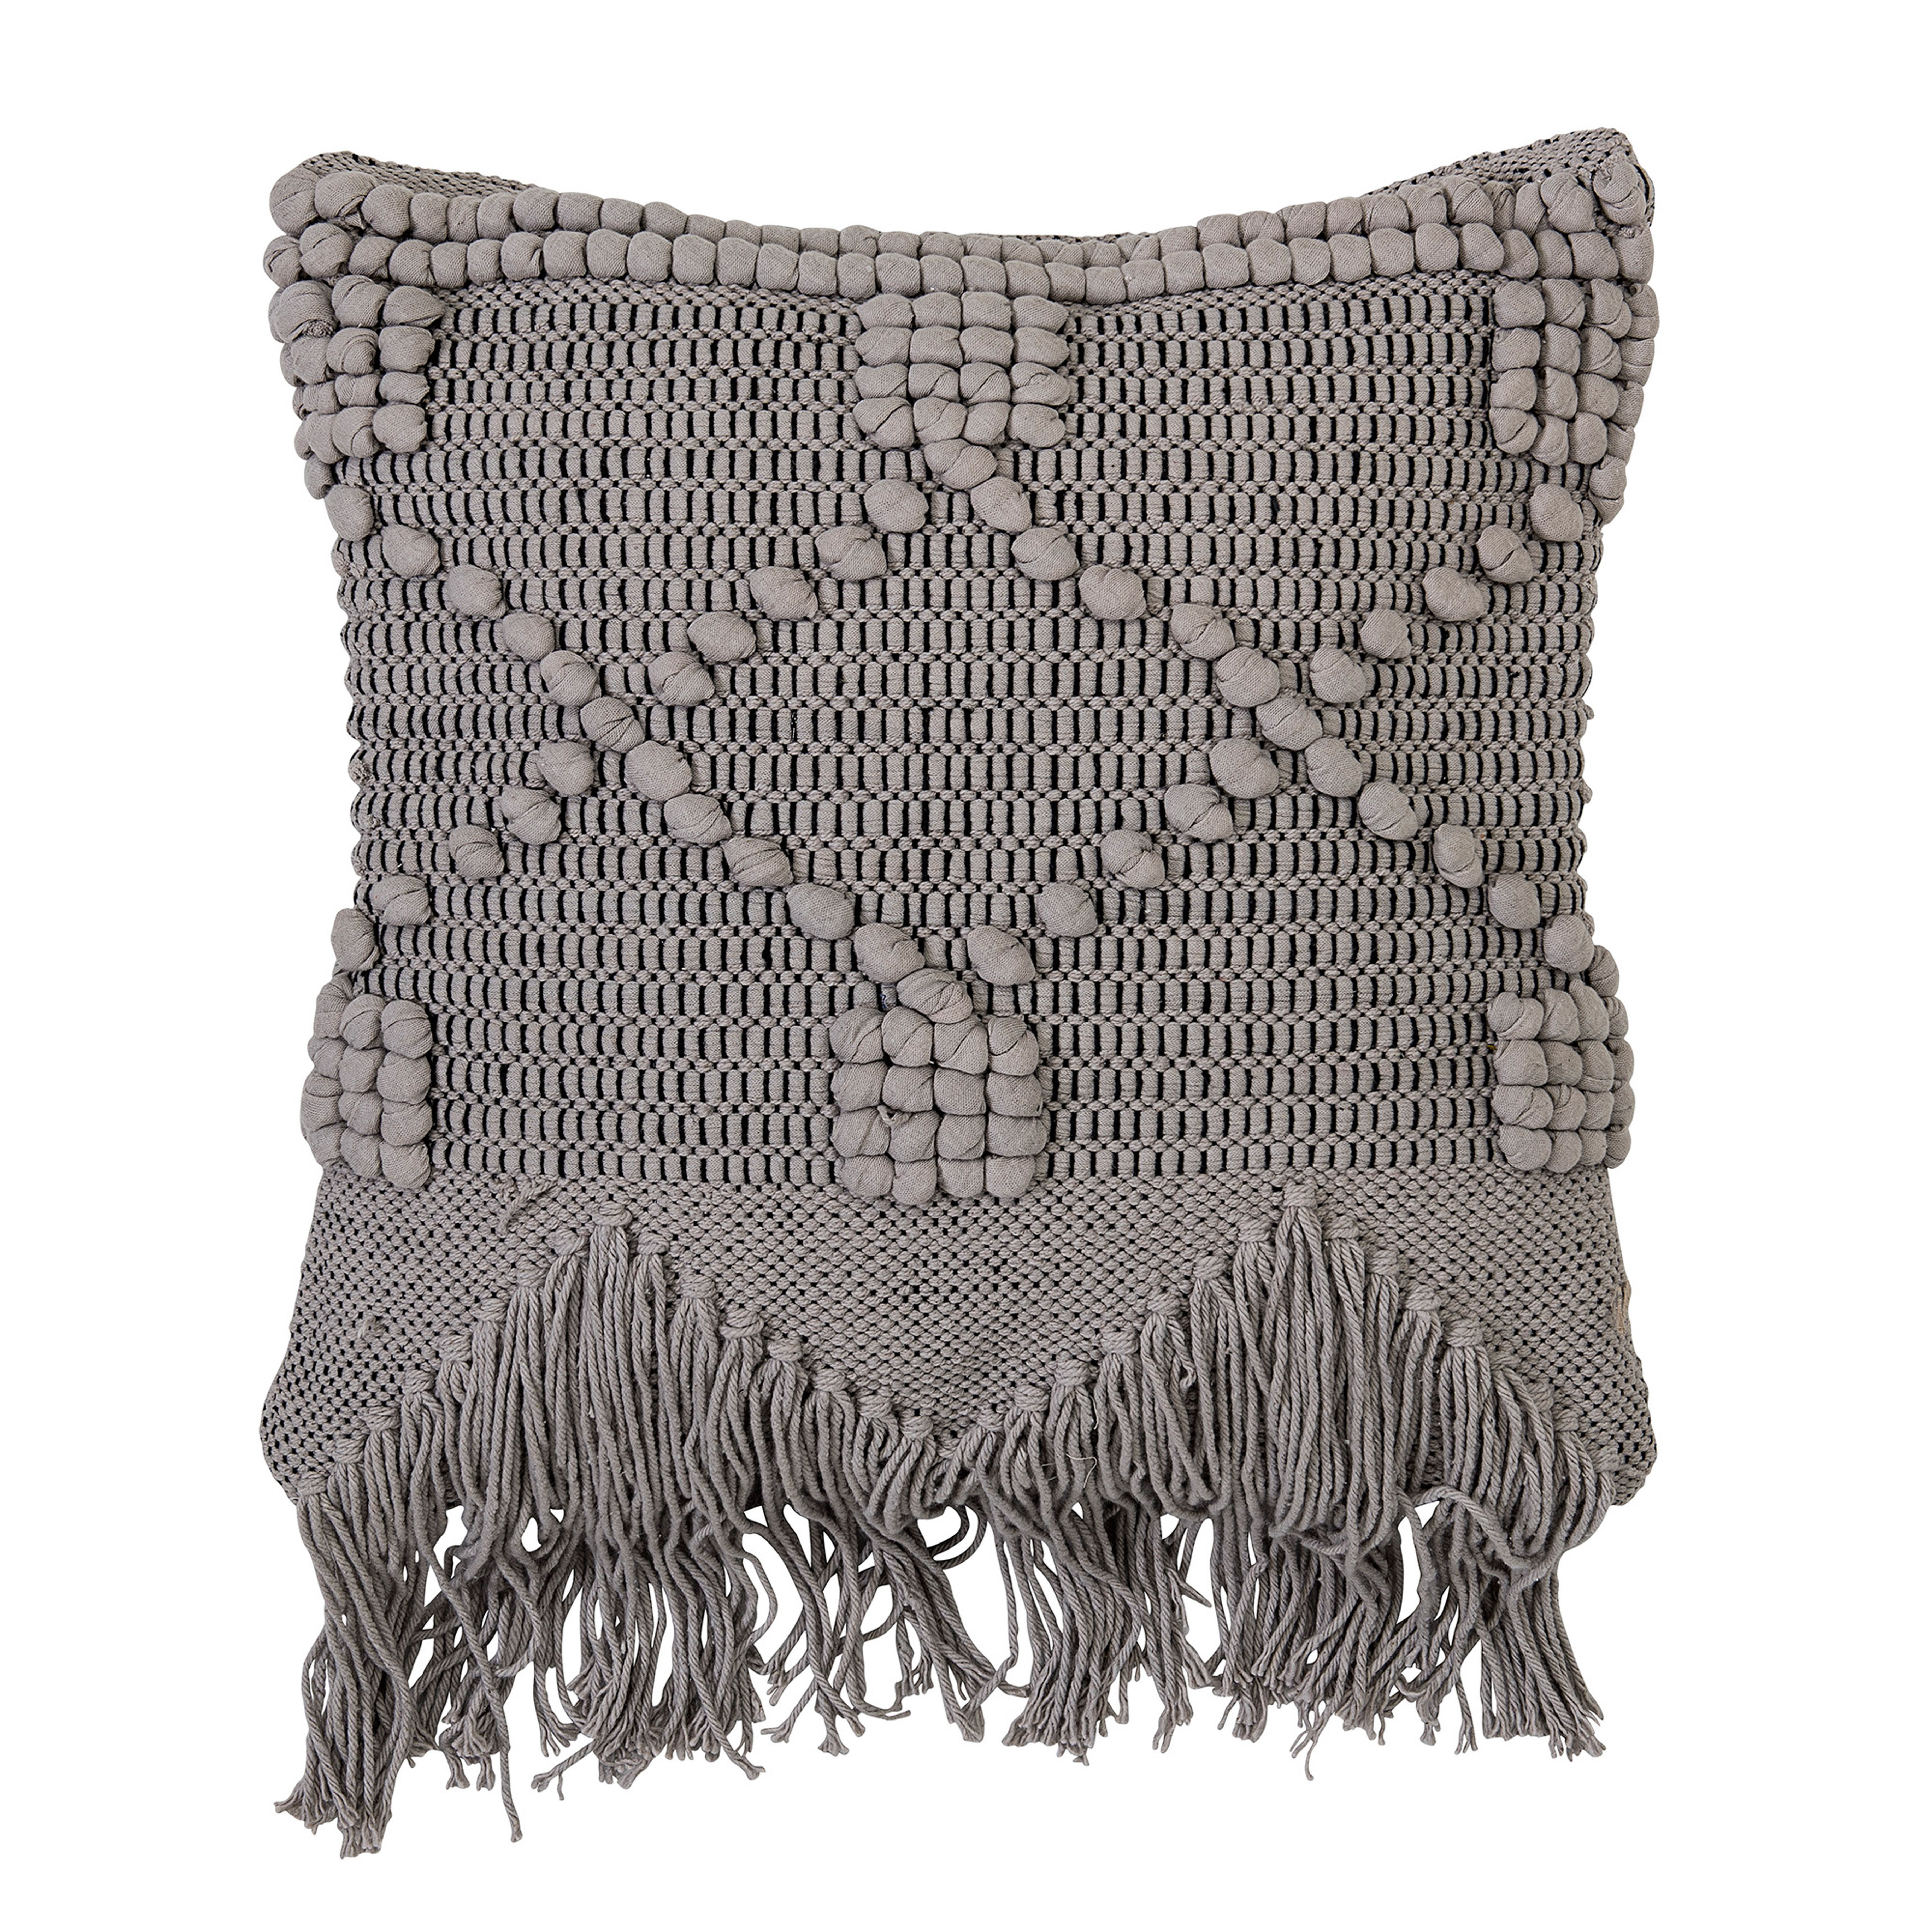 Textured Pillow with Fringe, Gray Cotton, 18" x 18" - Bloomingville